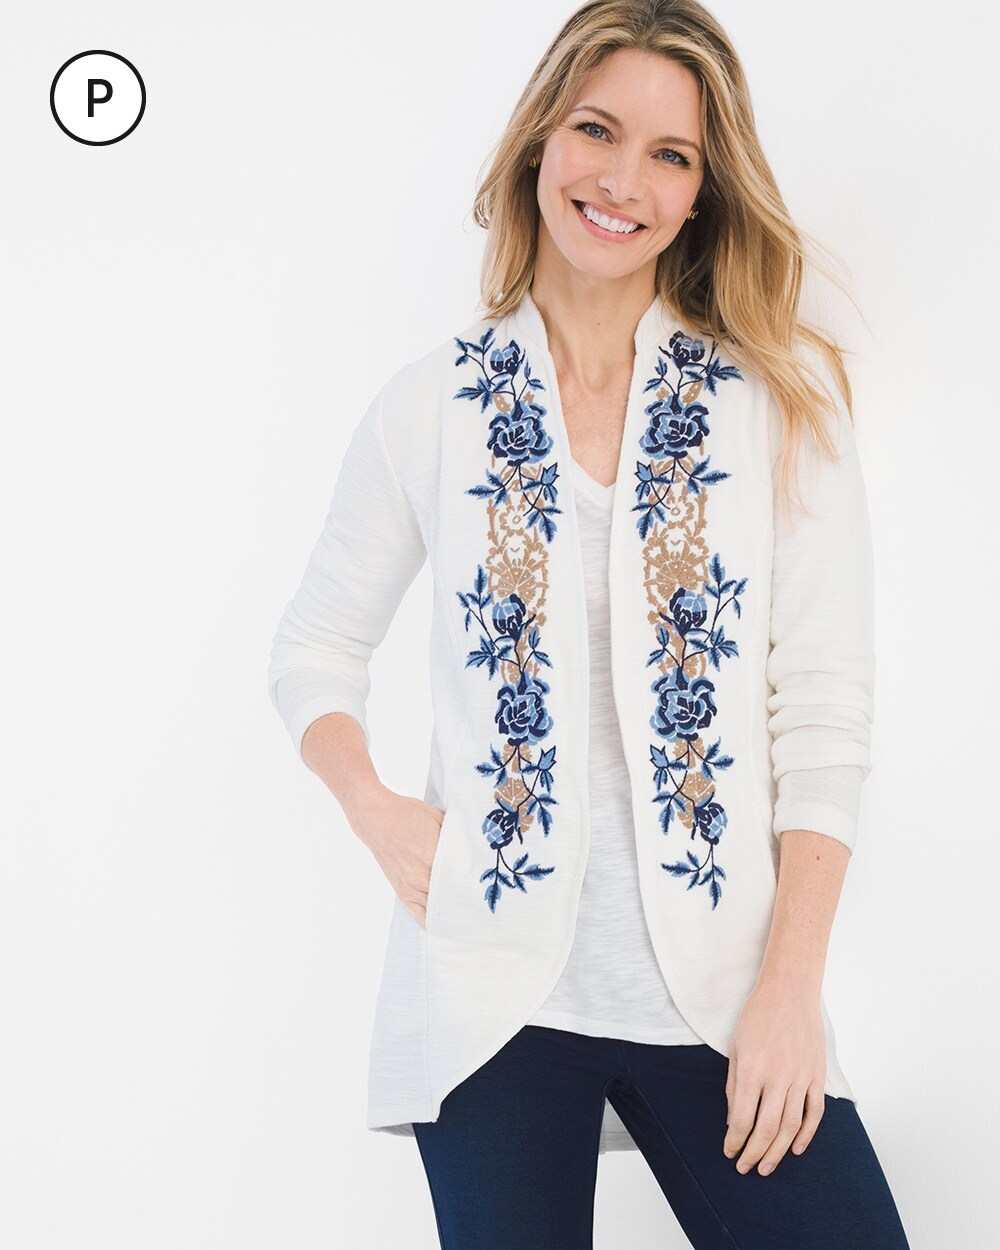 Zenergy Petite Floral Embroidered Jacket